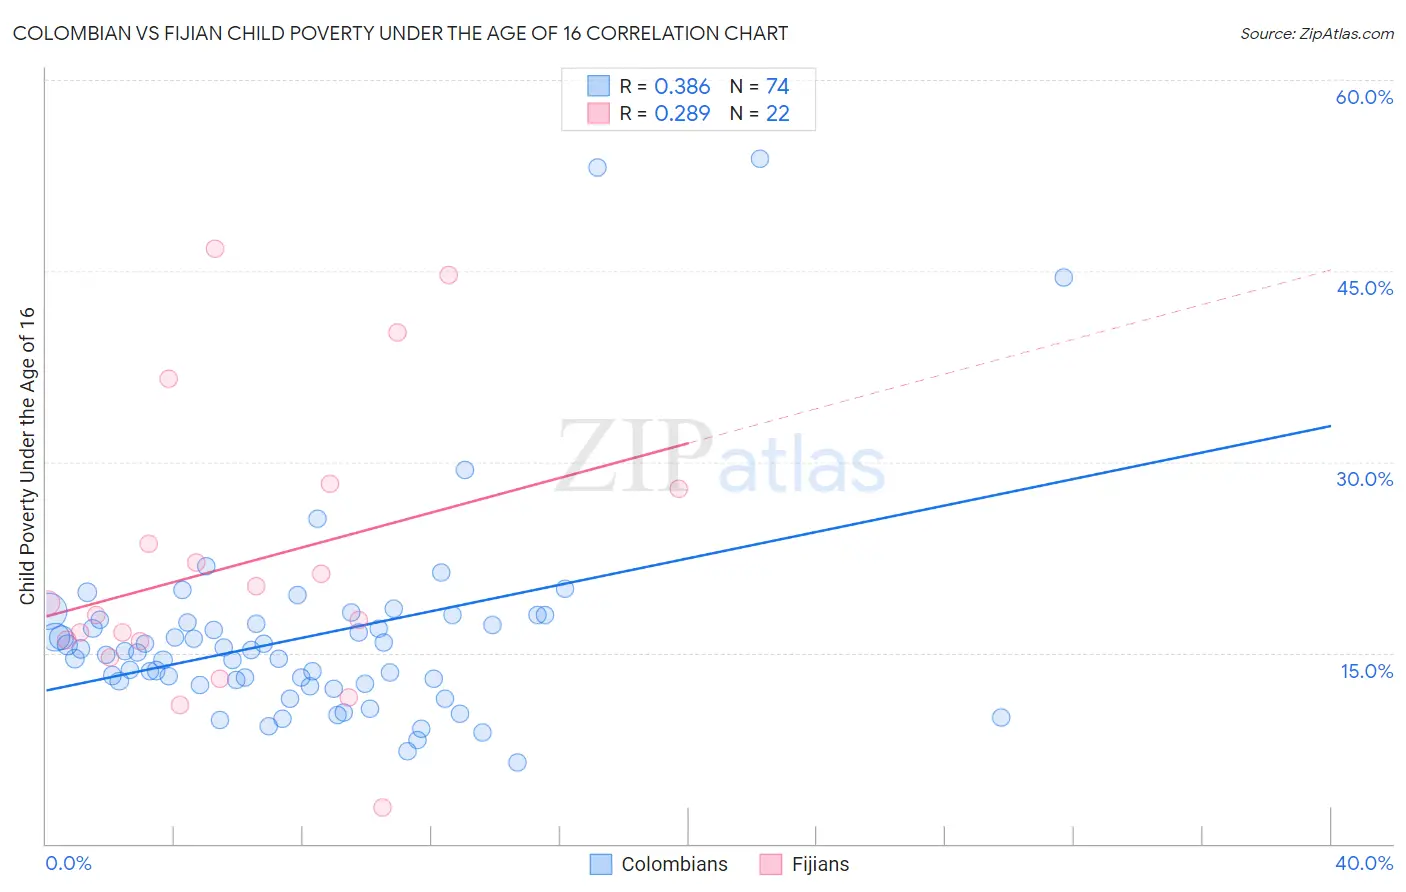 Colombian vs Fijian Child Poverty Under the Age of 16